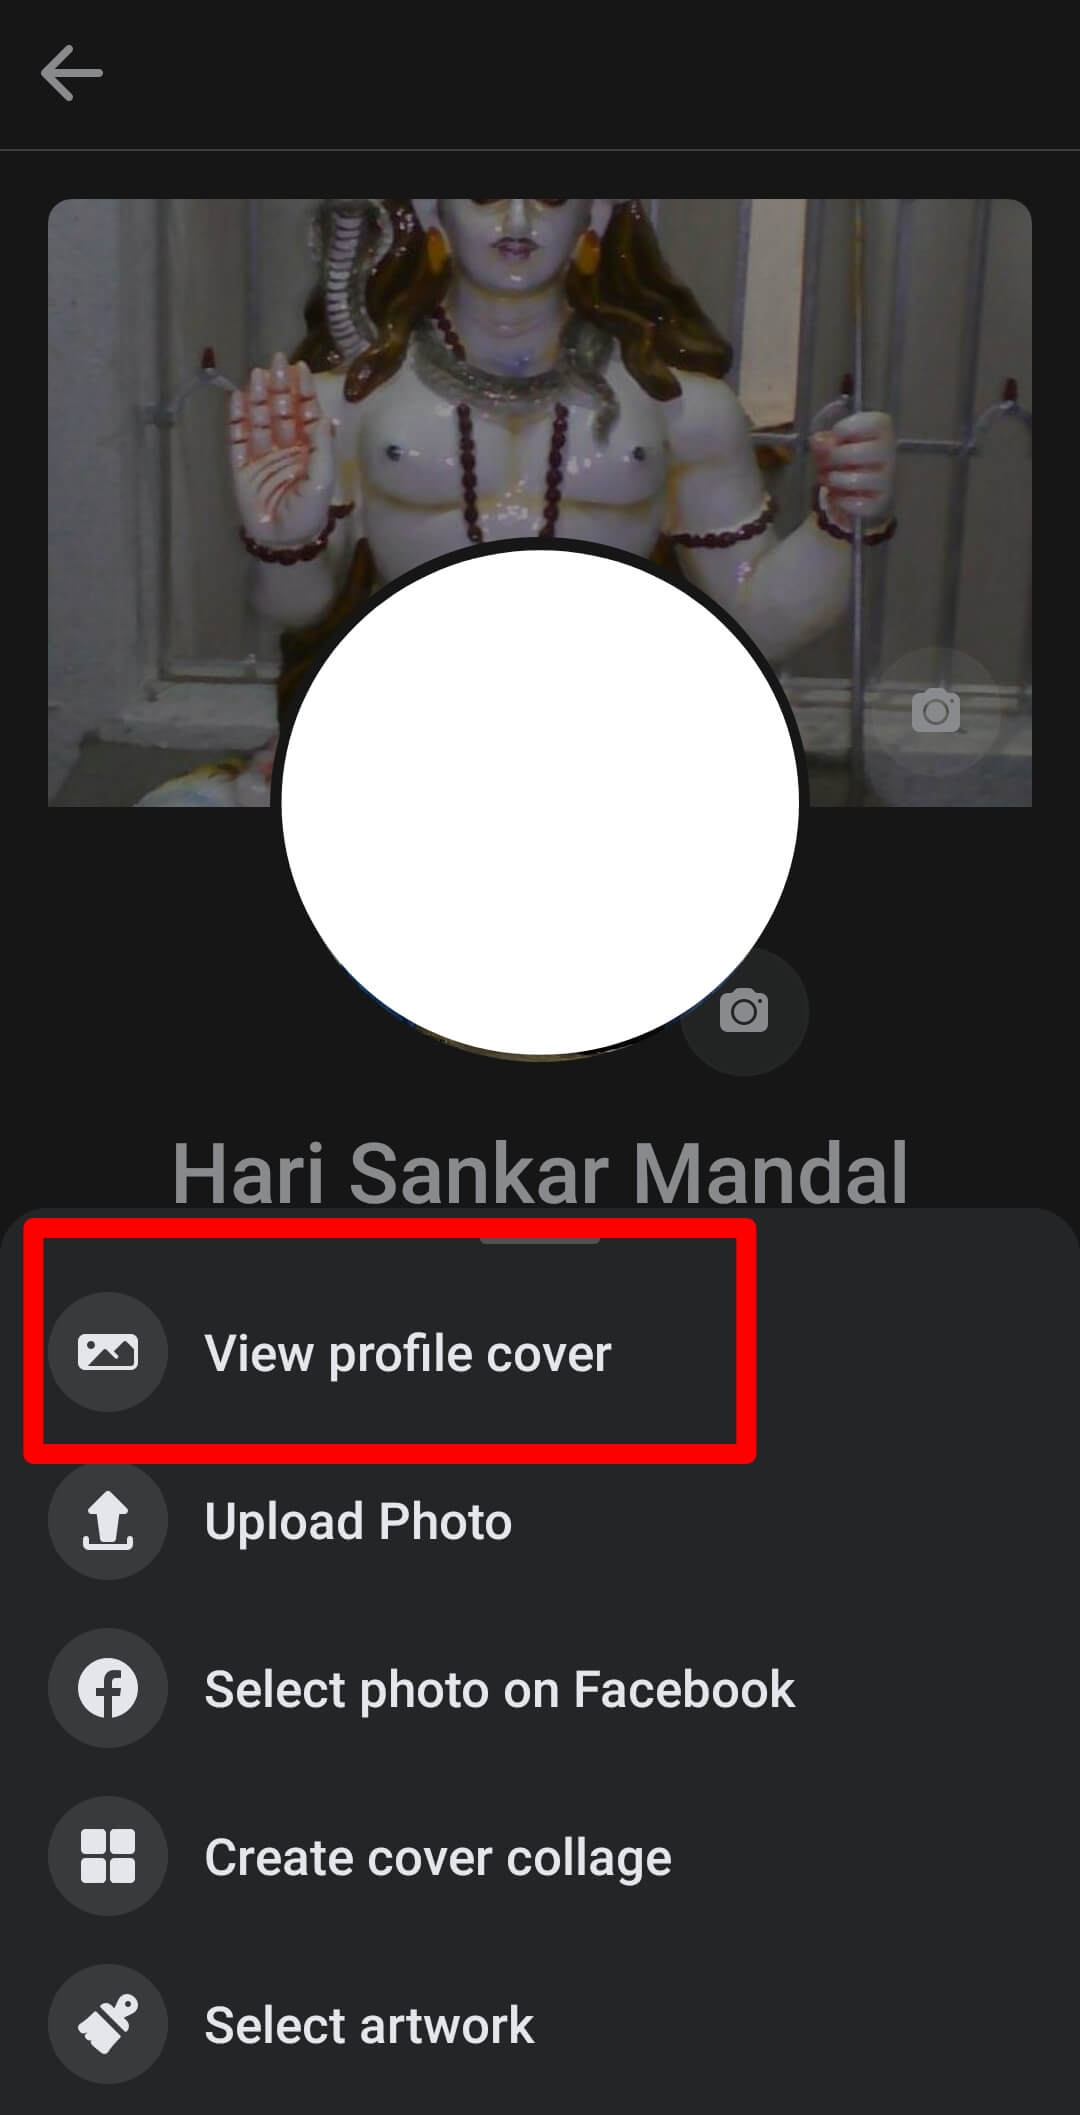 select view profile cover